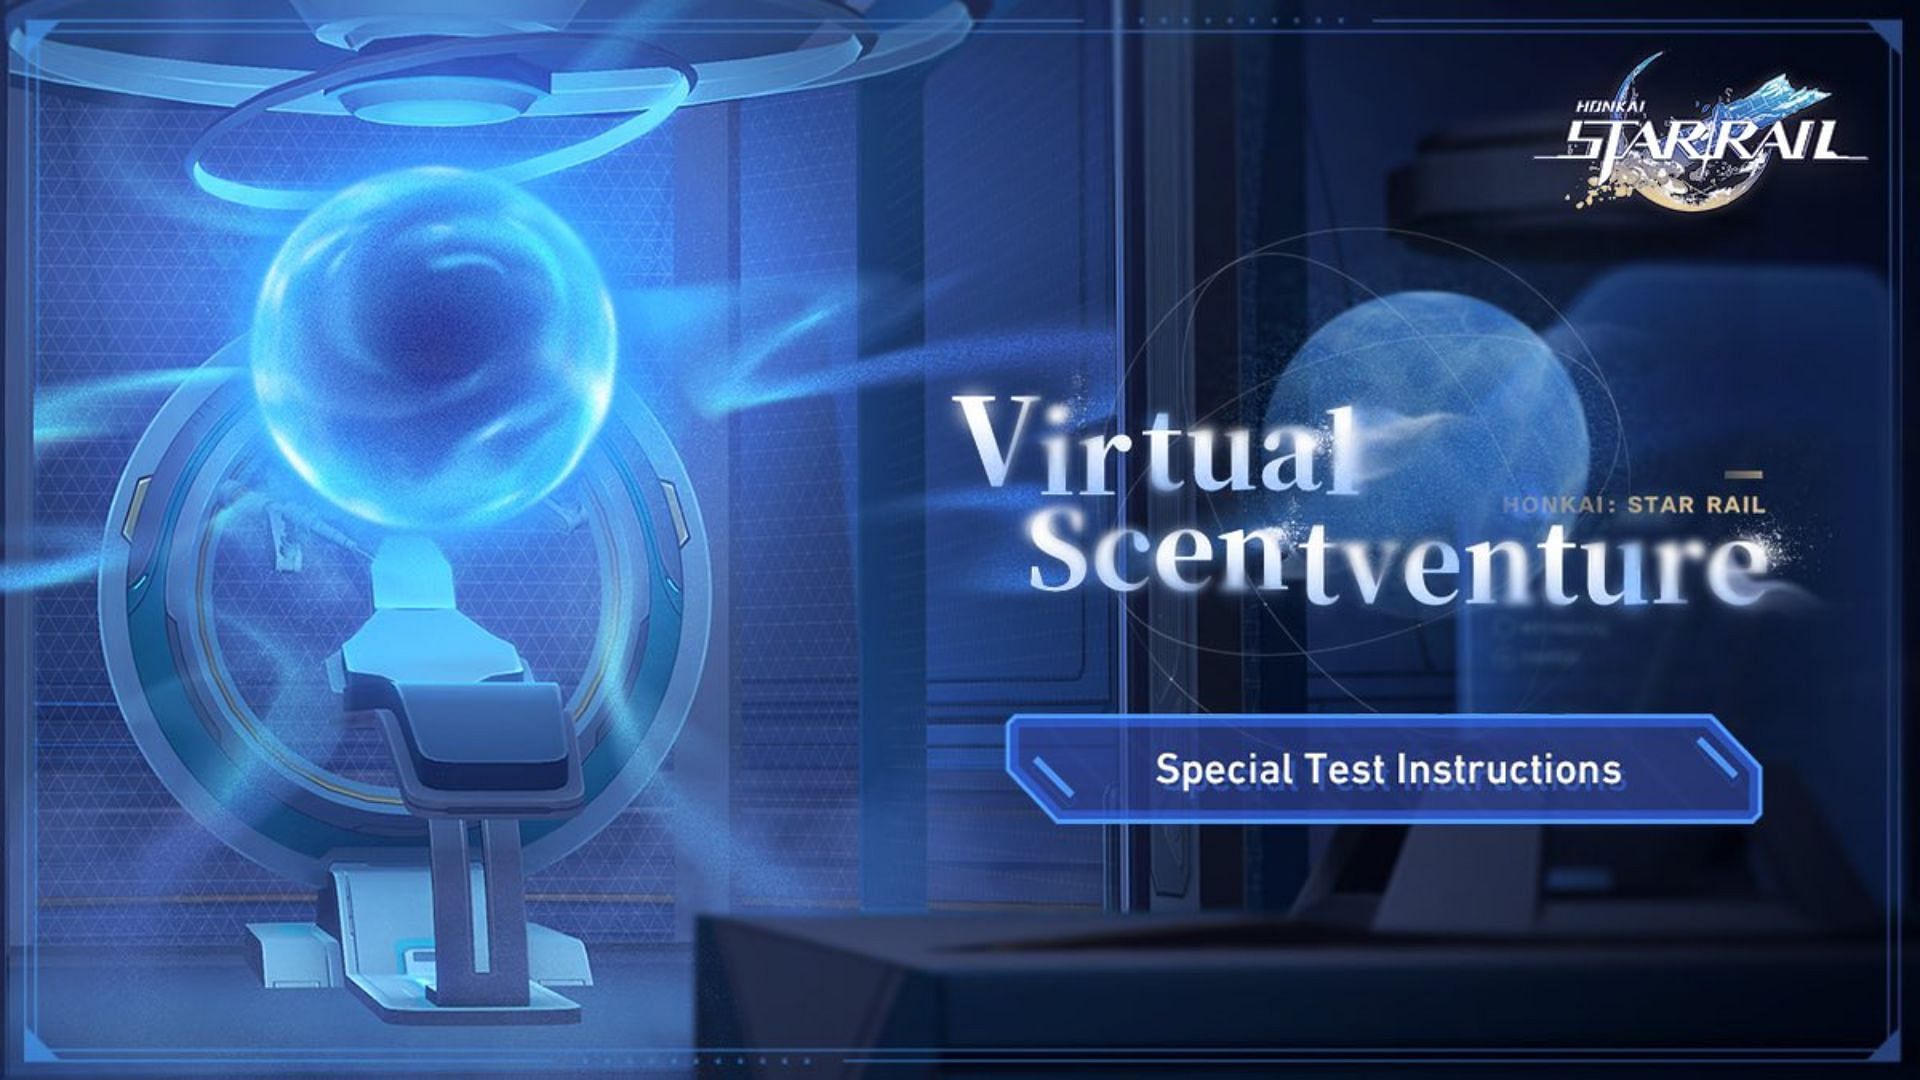 The official cover art for Virtual Scentventure